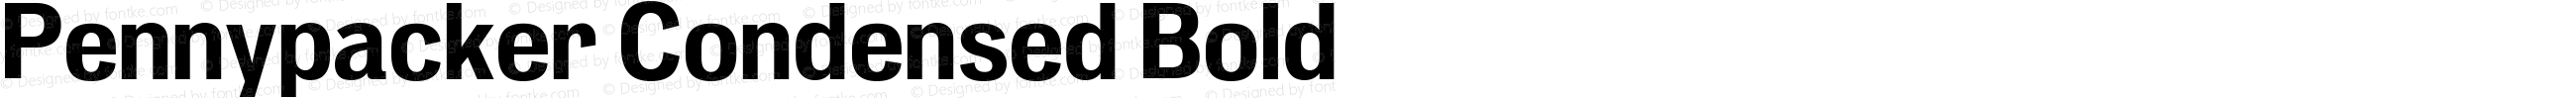 Pennypacker Condensed Bold